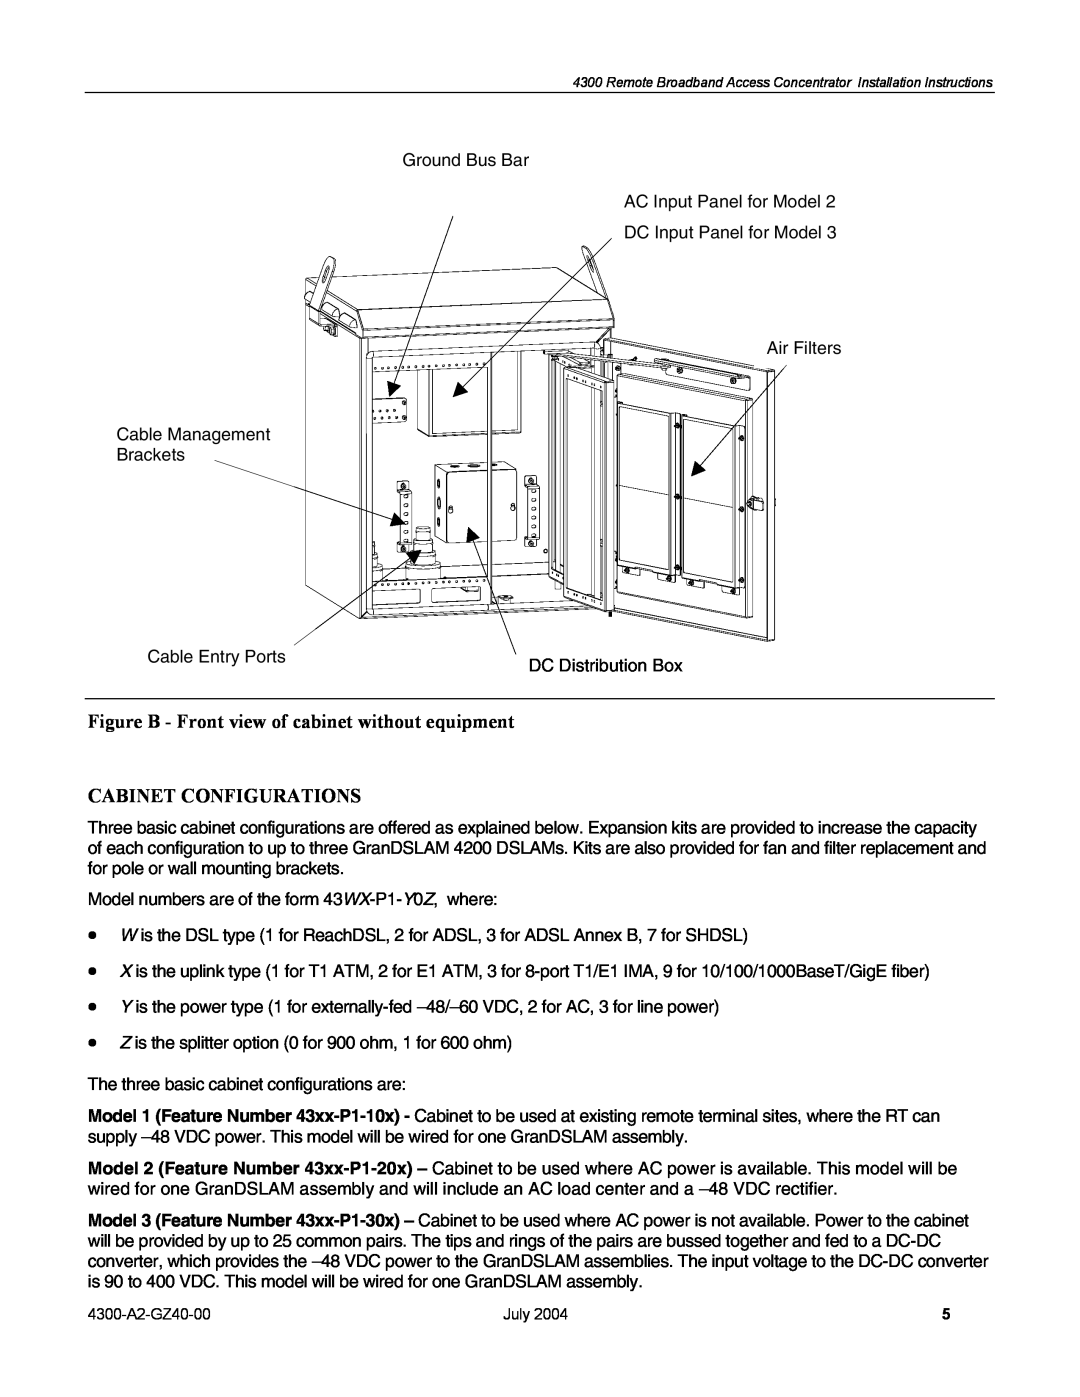 Paradyne 4300 installation instructions Figure B - Front view of cabinet without equipment, Cabinet Configurations 